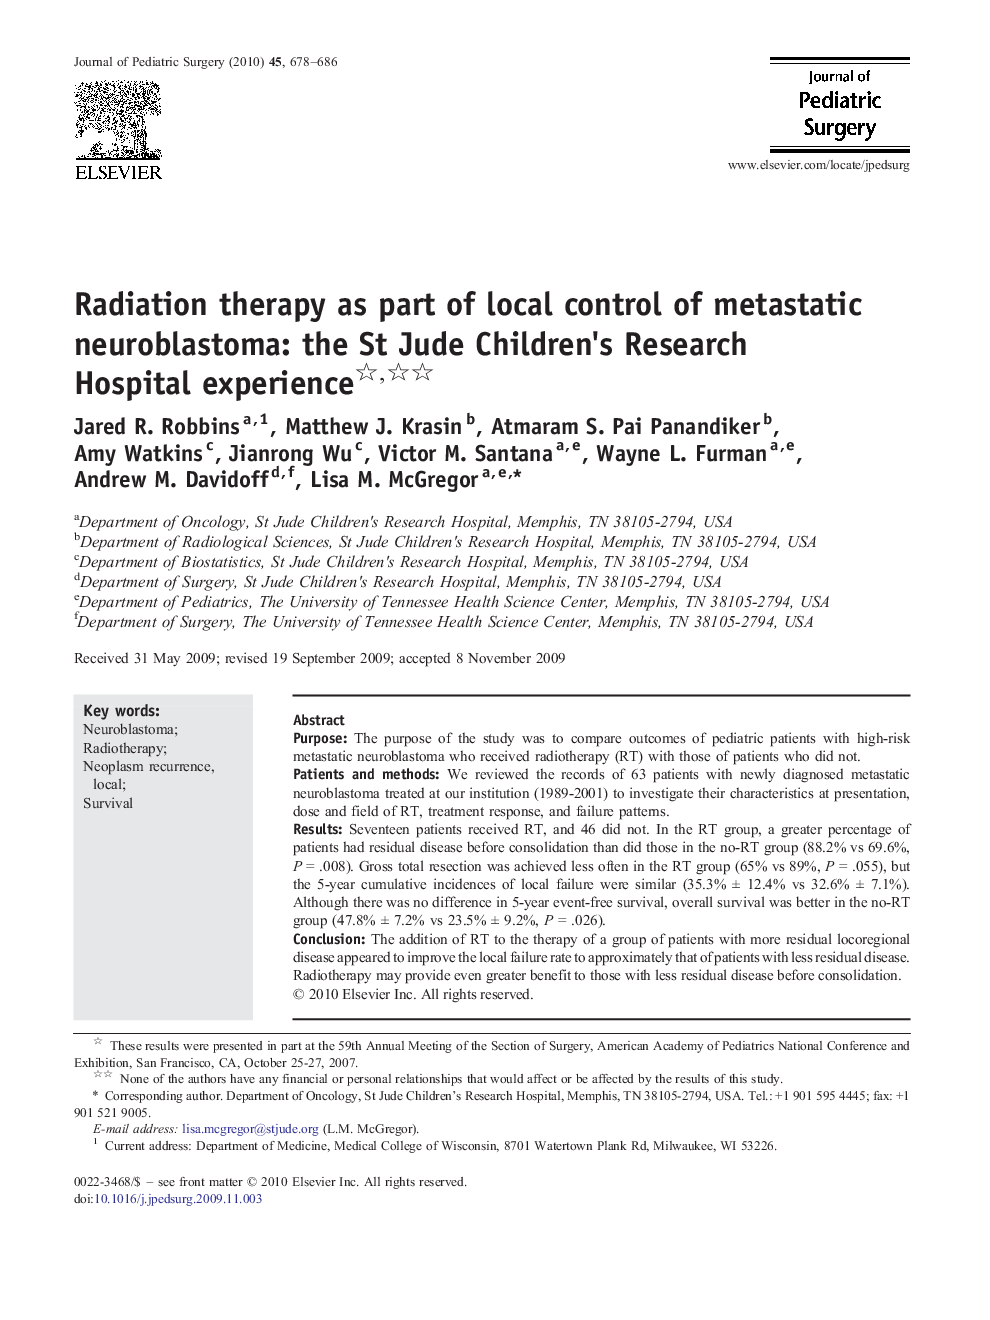 Radiation therapy as part of local control of metastatic neuroblastoma: the St Jude Children's Research Hospital experience 